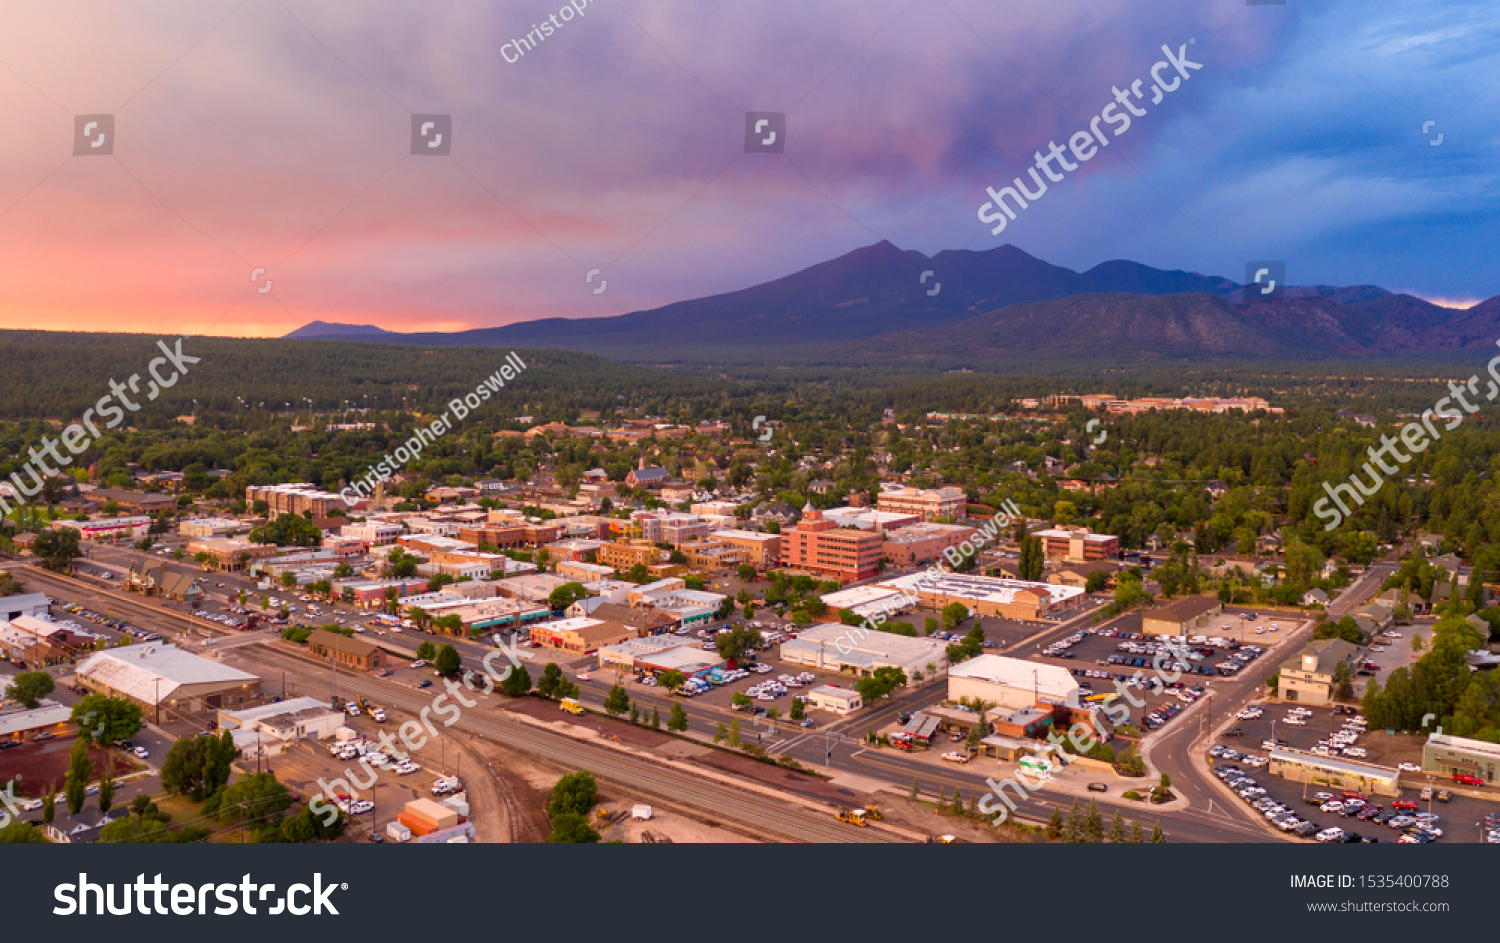 Blue and Orange color swirls around in the clouds at sunset over Flagstaff Arizona #1535400788